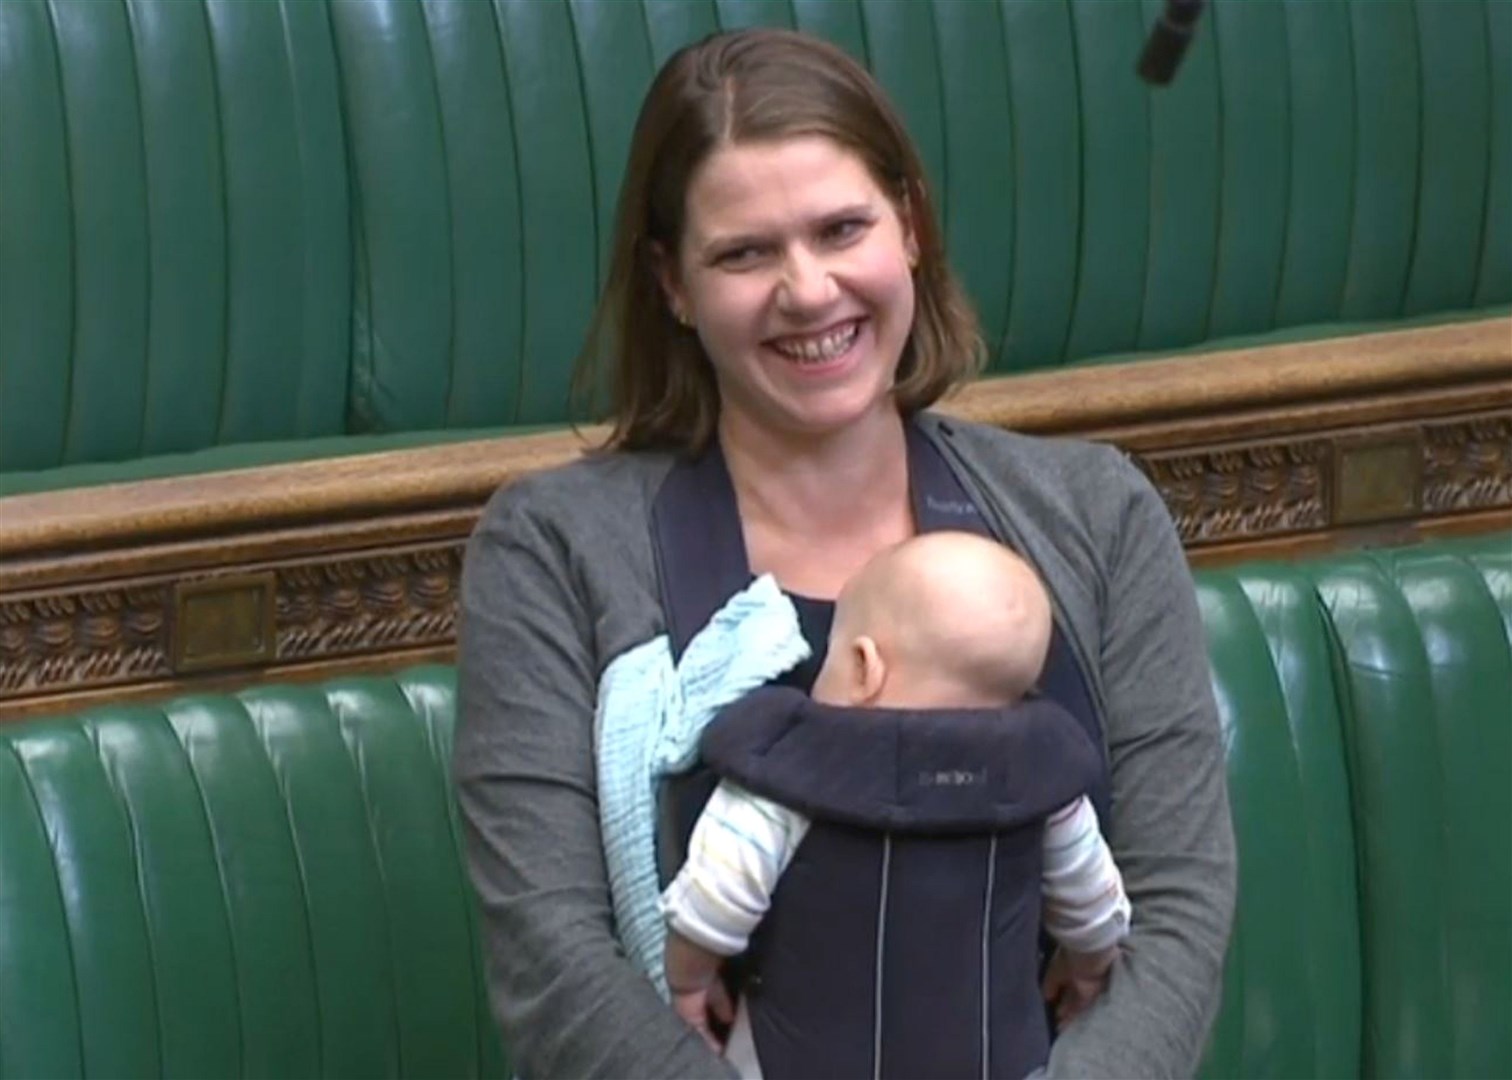 Then-Liberal Democrat deputy leader Jo Swinson took her newborn baby to the Commons chamber in September 2018 (PA)